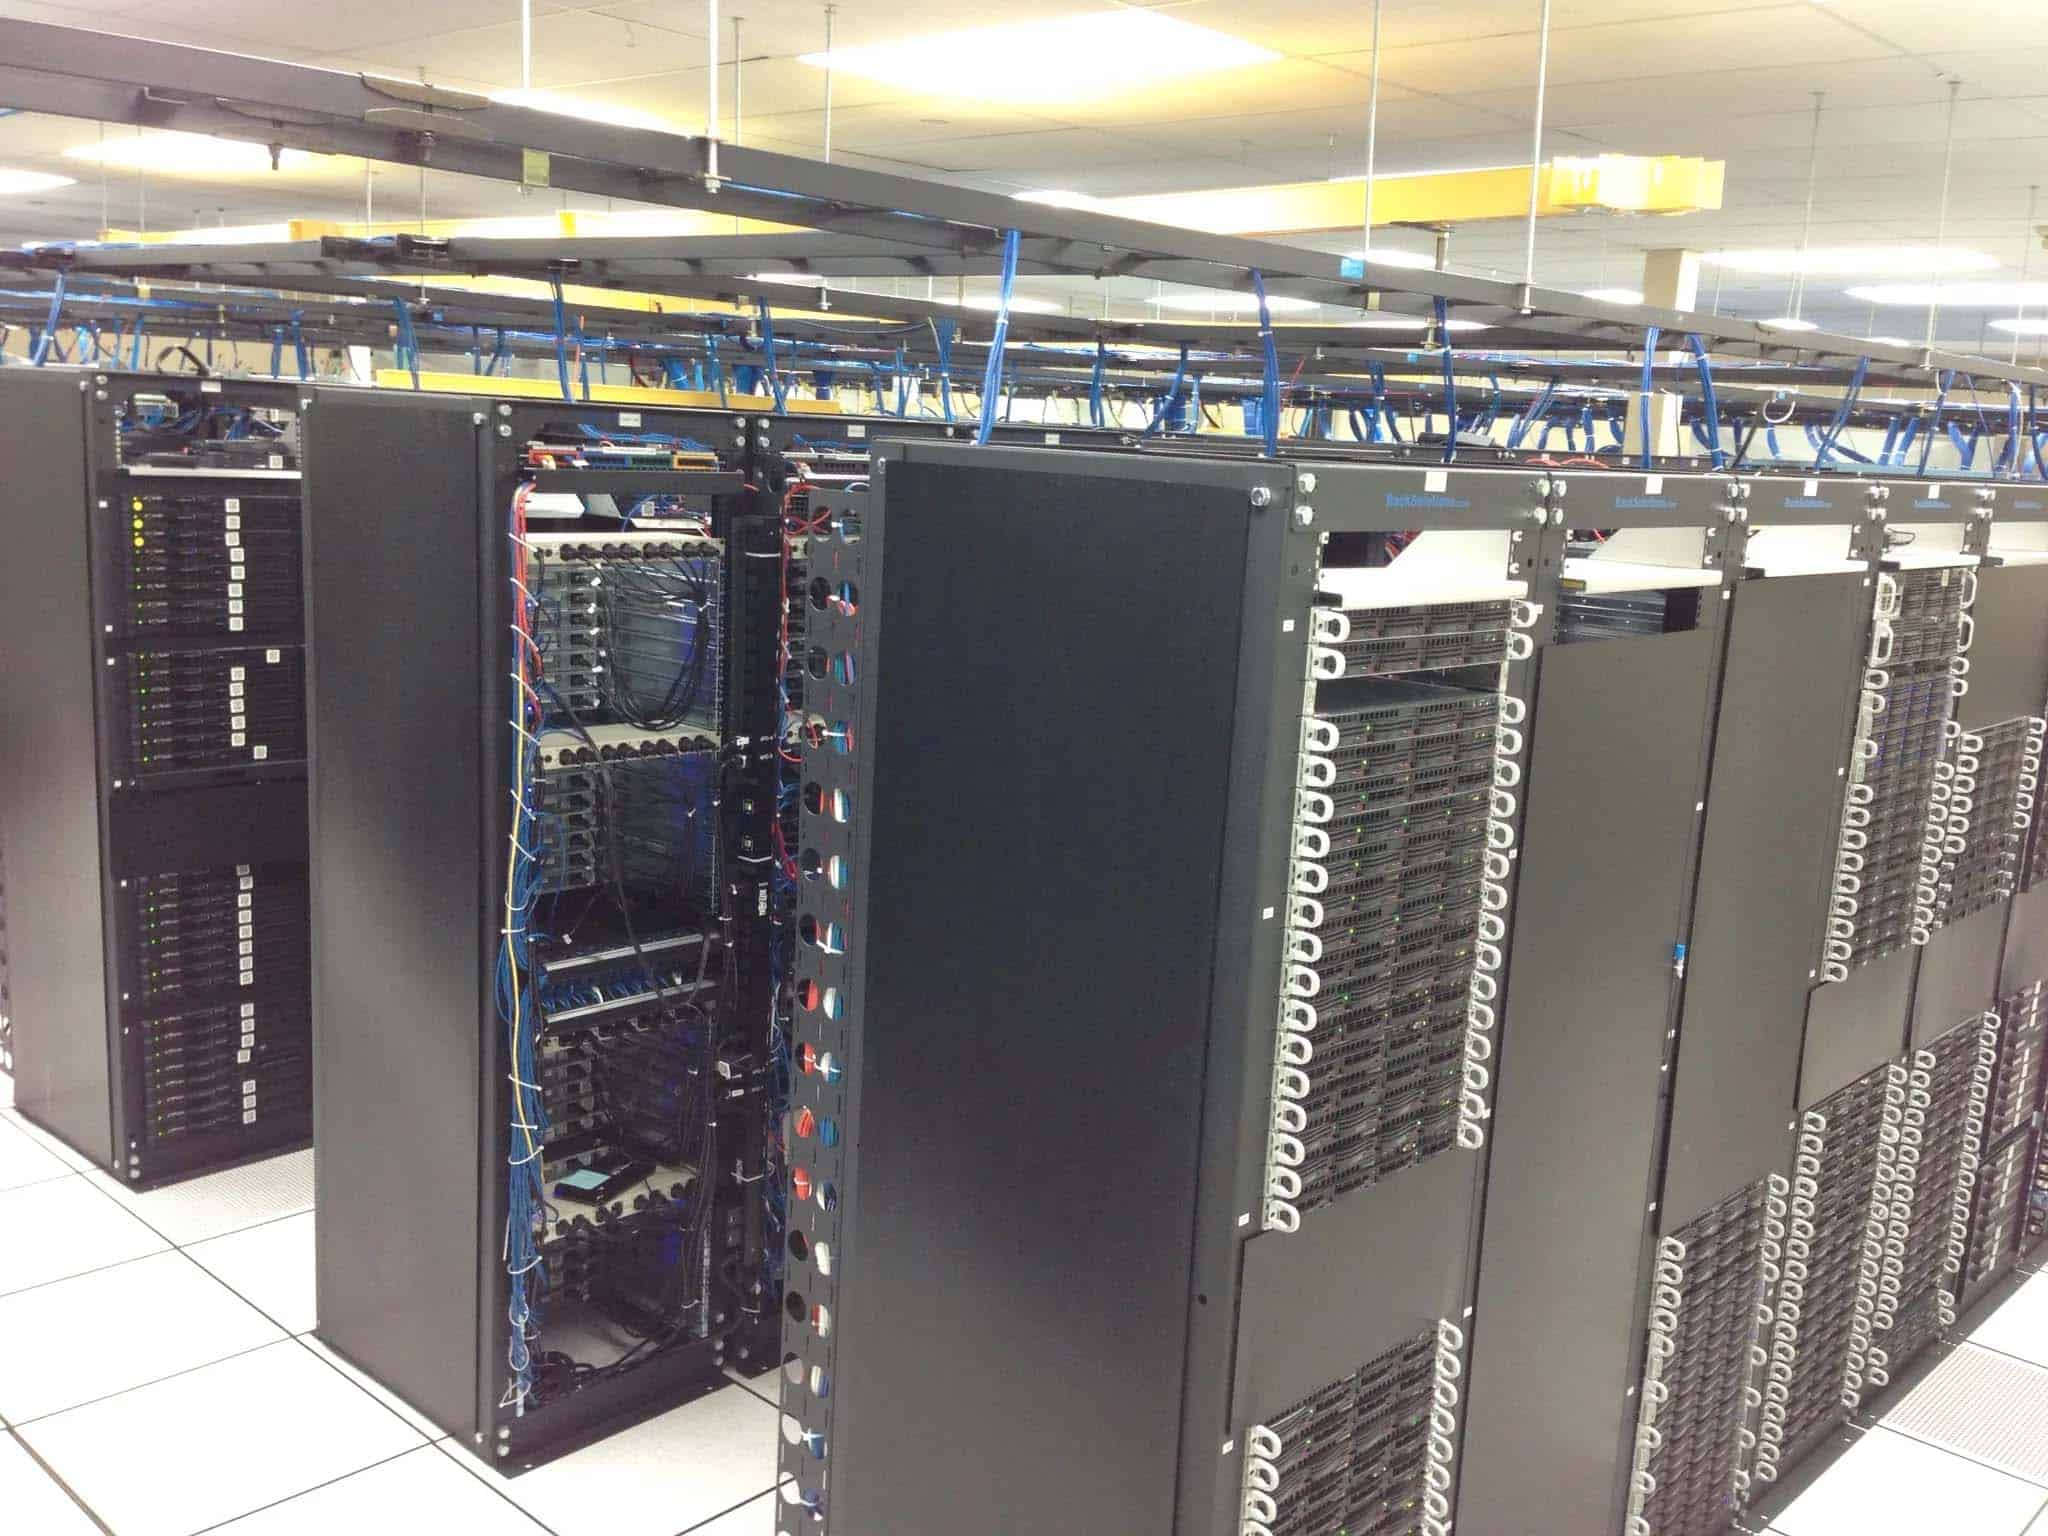 Is Cable Management Important For Server Racks? - RackSolutions